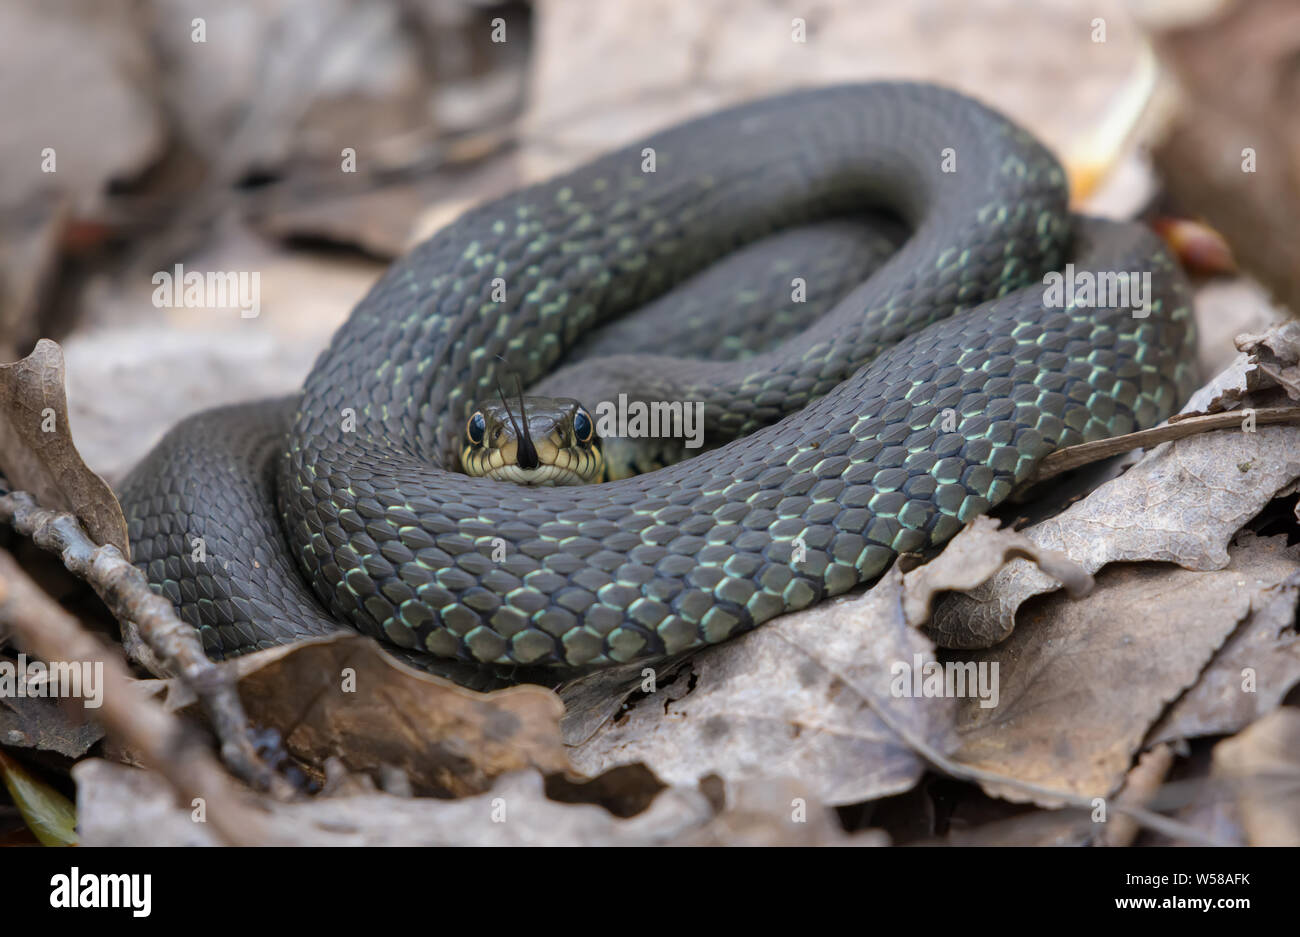 Not very big Grass snake lies ringed on forest leaves and litter floor while sticking his tongue out to gather scents Stock Photo